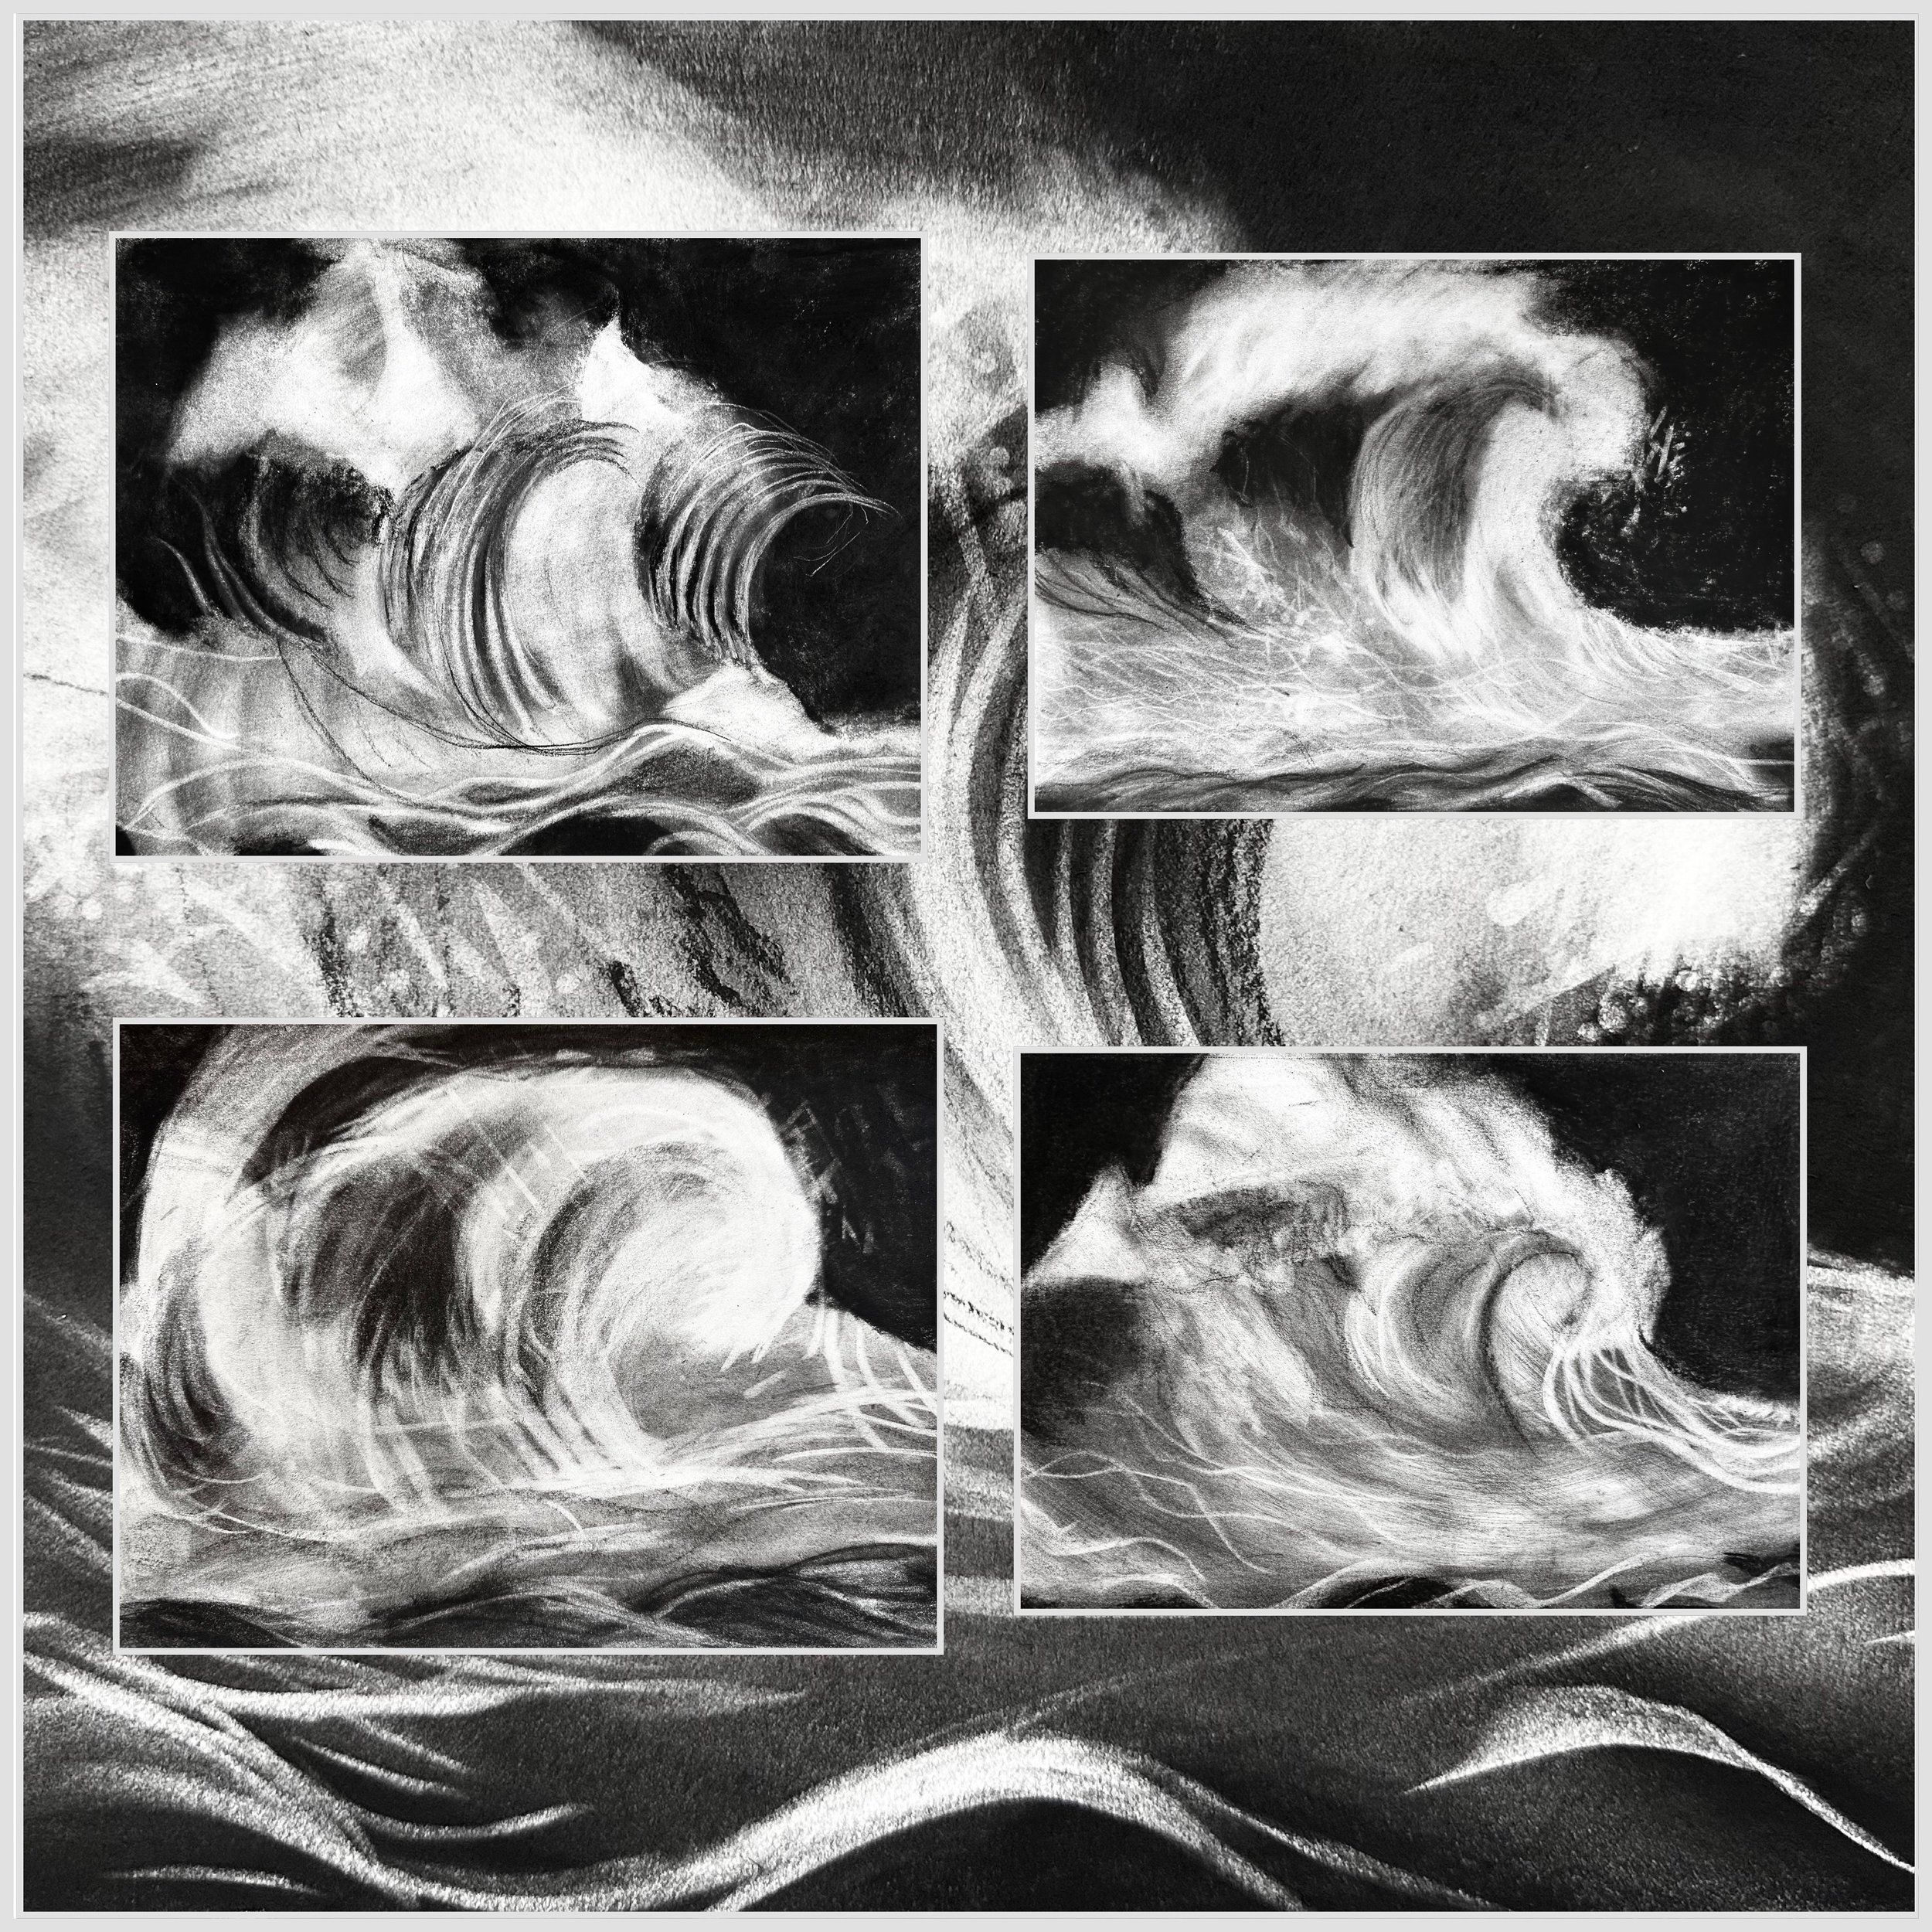 creativity comes in waves, like in the ocean. you just have to wait for the next wave and be ready for it. 🌊 

Incredible artwork by &lsquo;The Magic of Charcoal&rsquo; class @visualartsmississauga